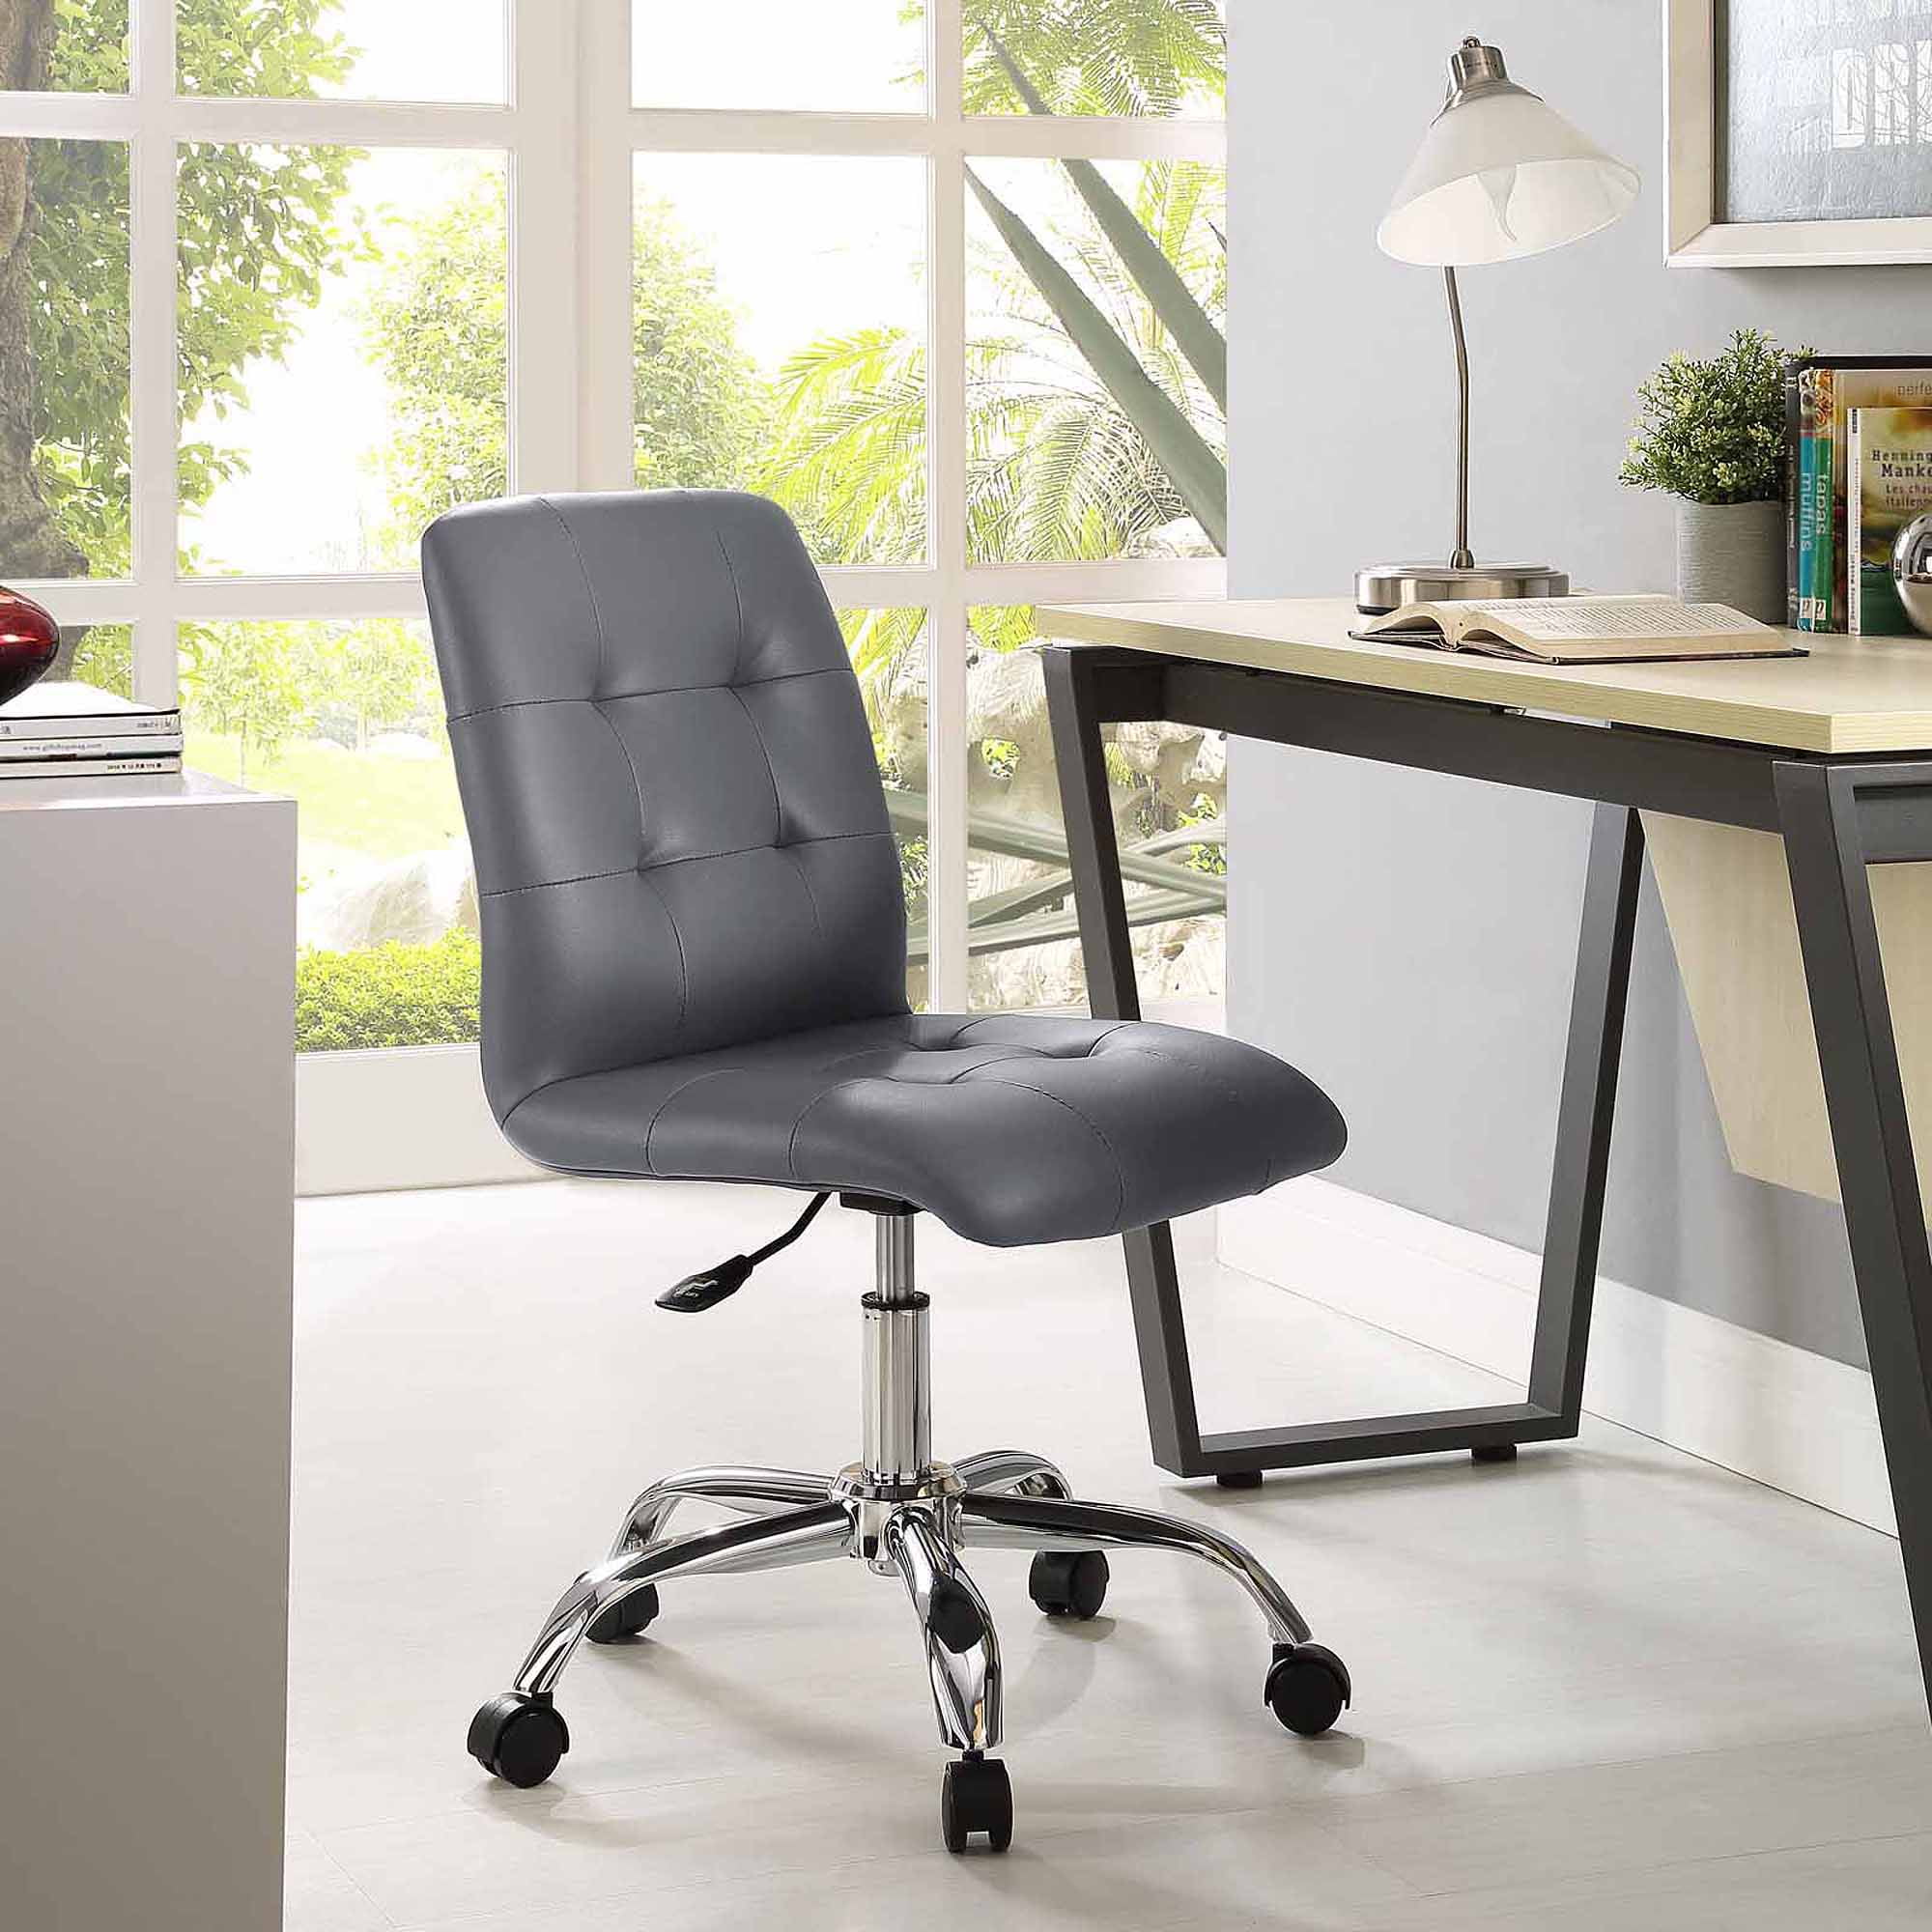 Modway Prim Mid Back Office Chair Multiple Colors for sale online 